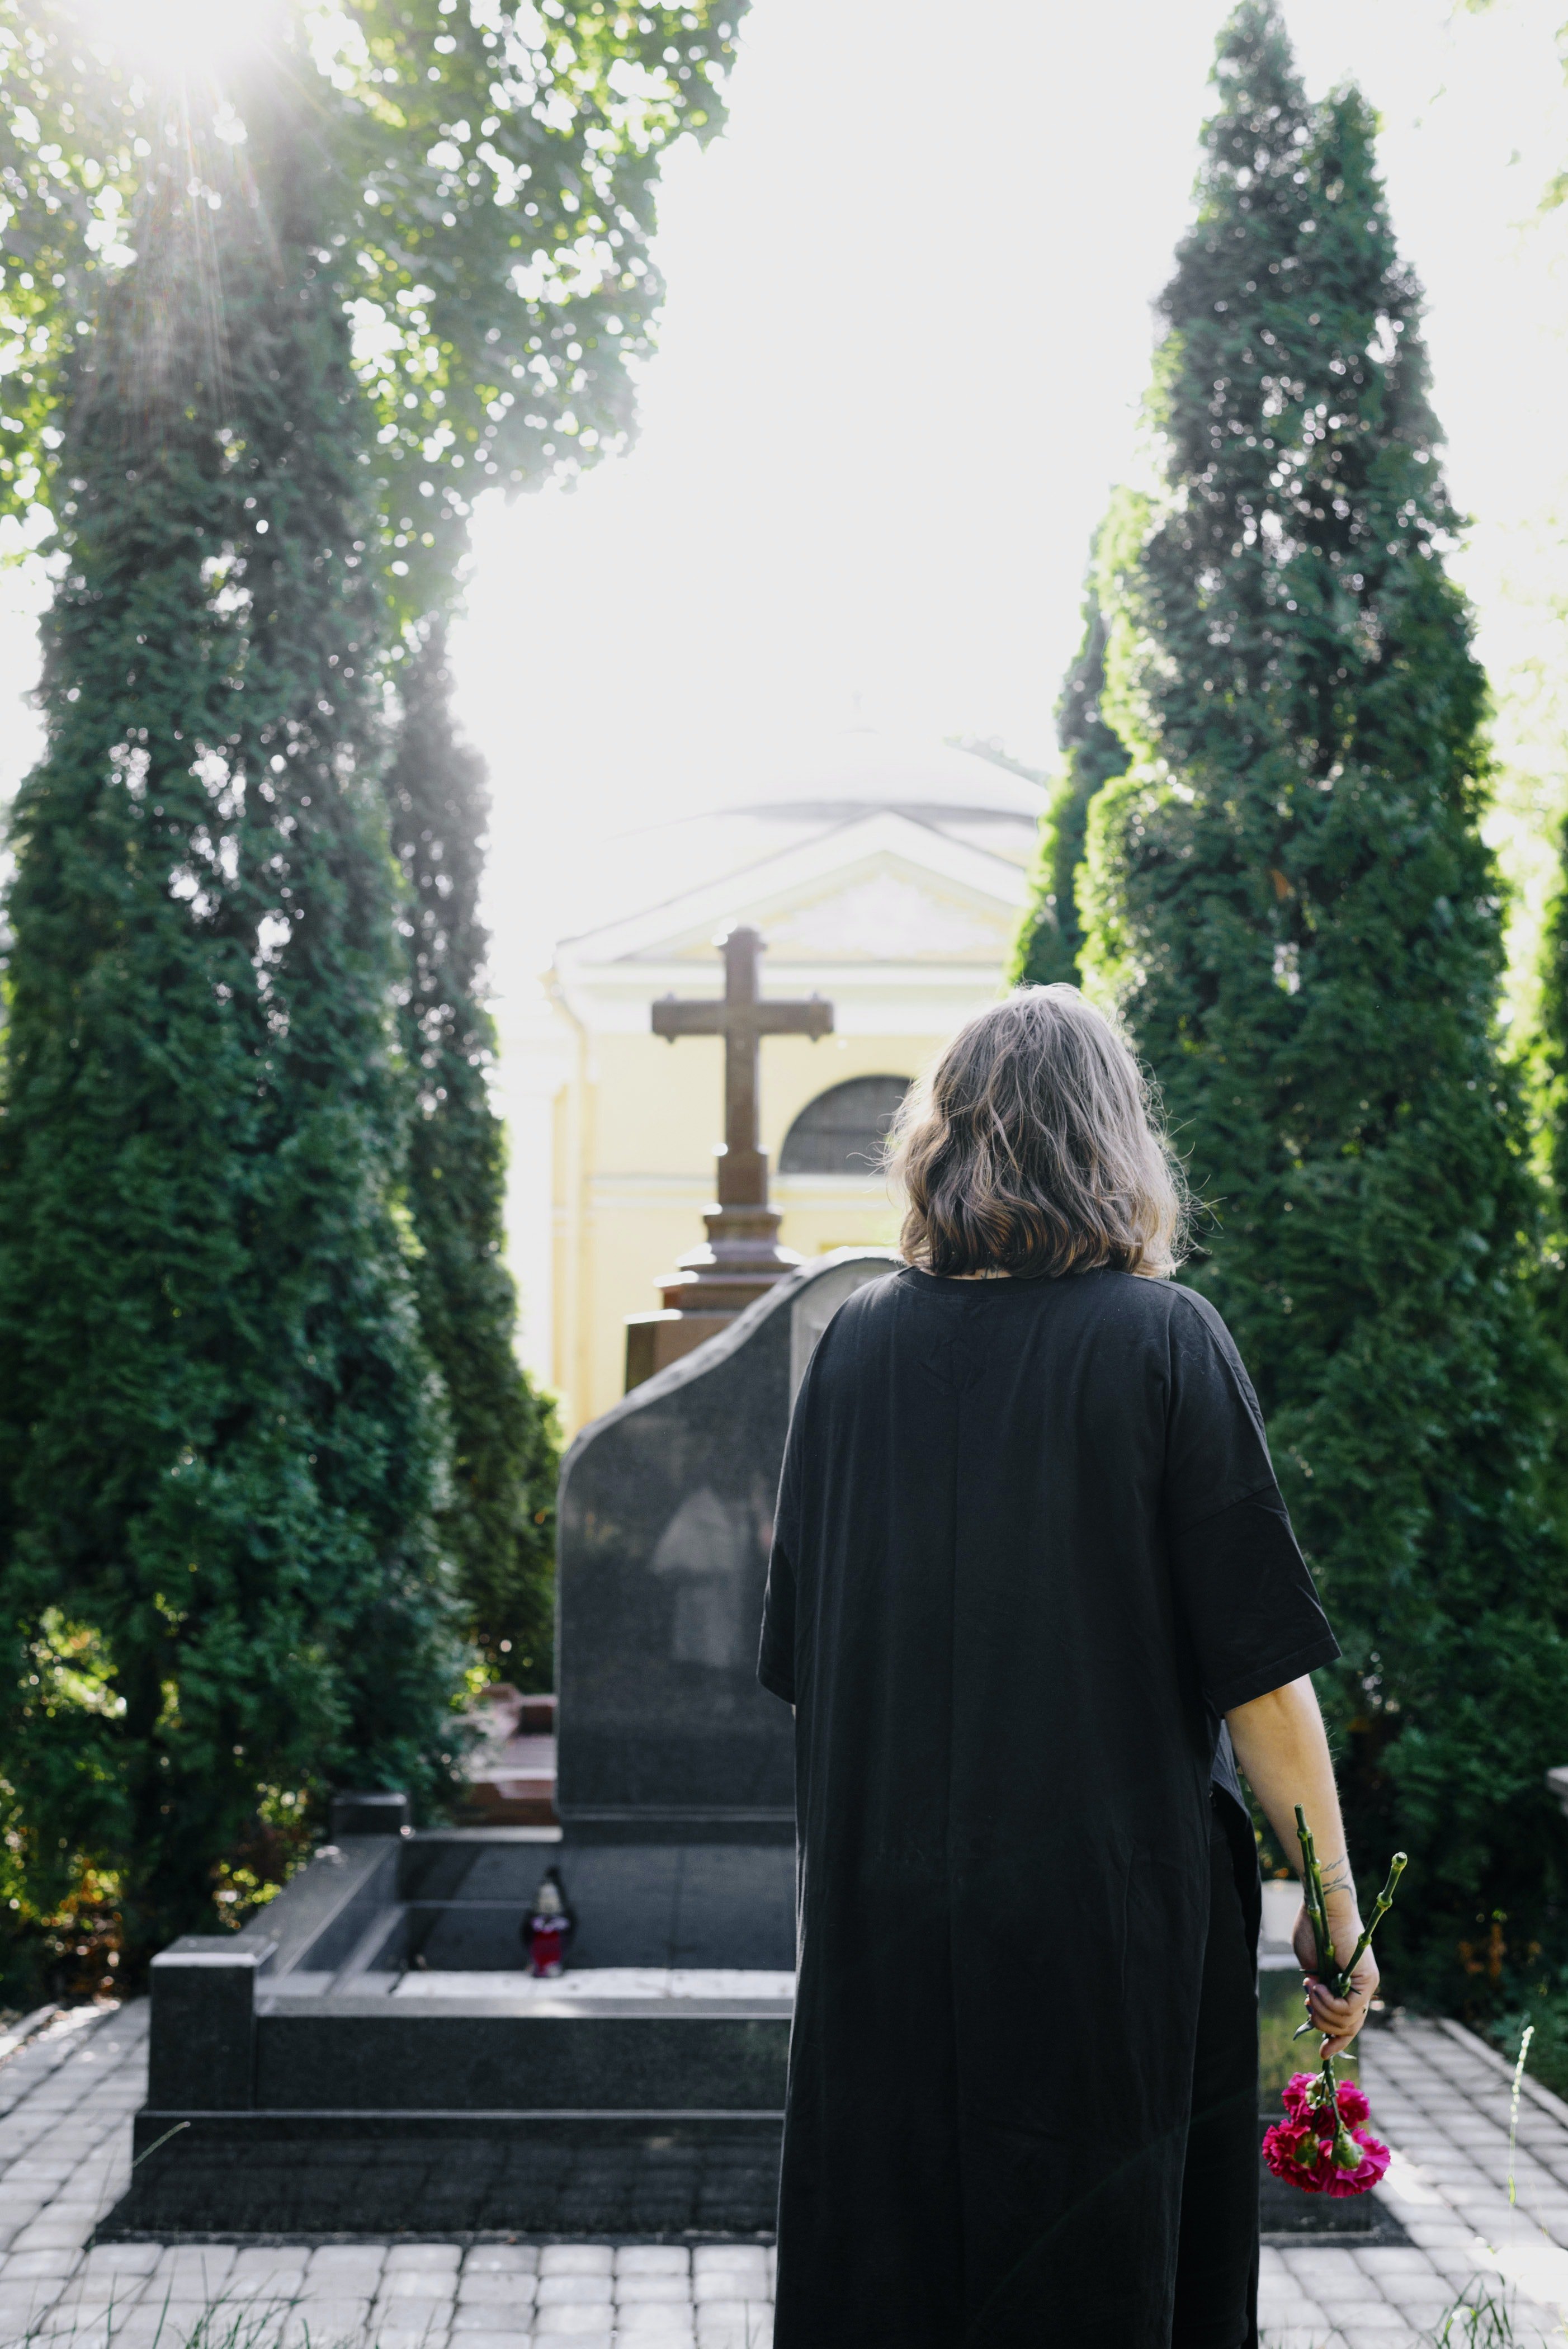 Patricia and George were visiting the grave of Patricia's late mother when they thought they bumped into Roy. | Photo: Pexels